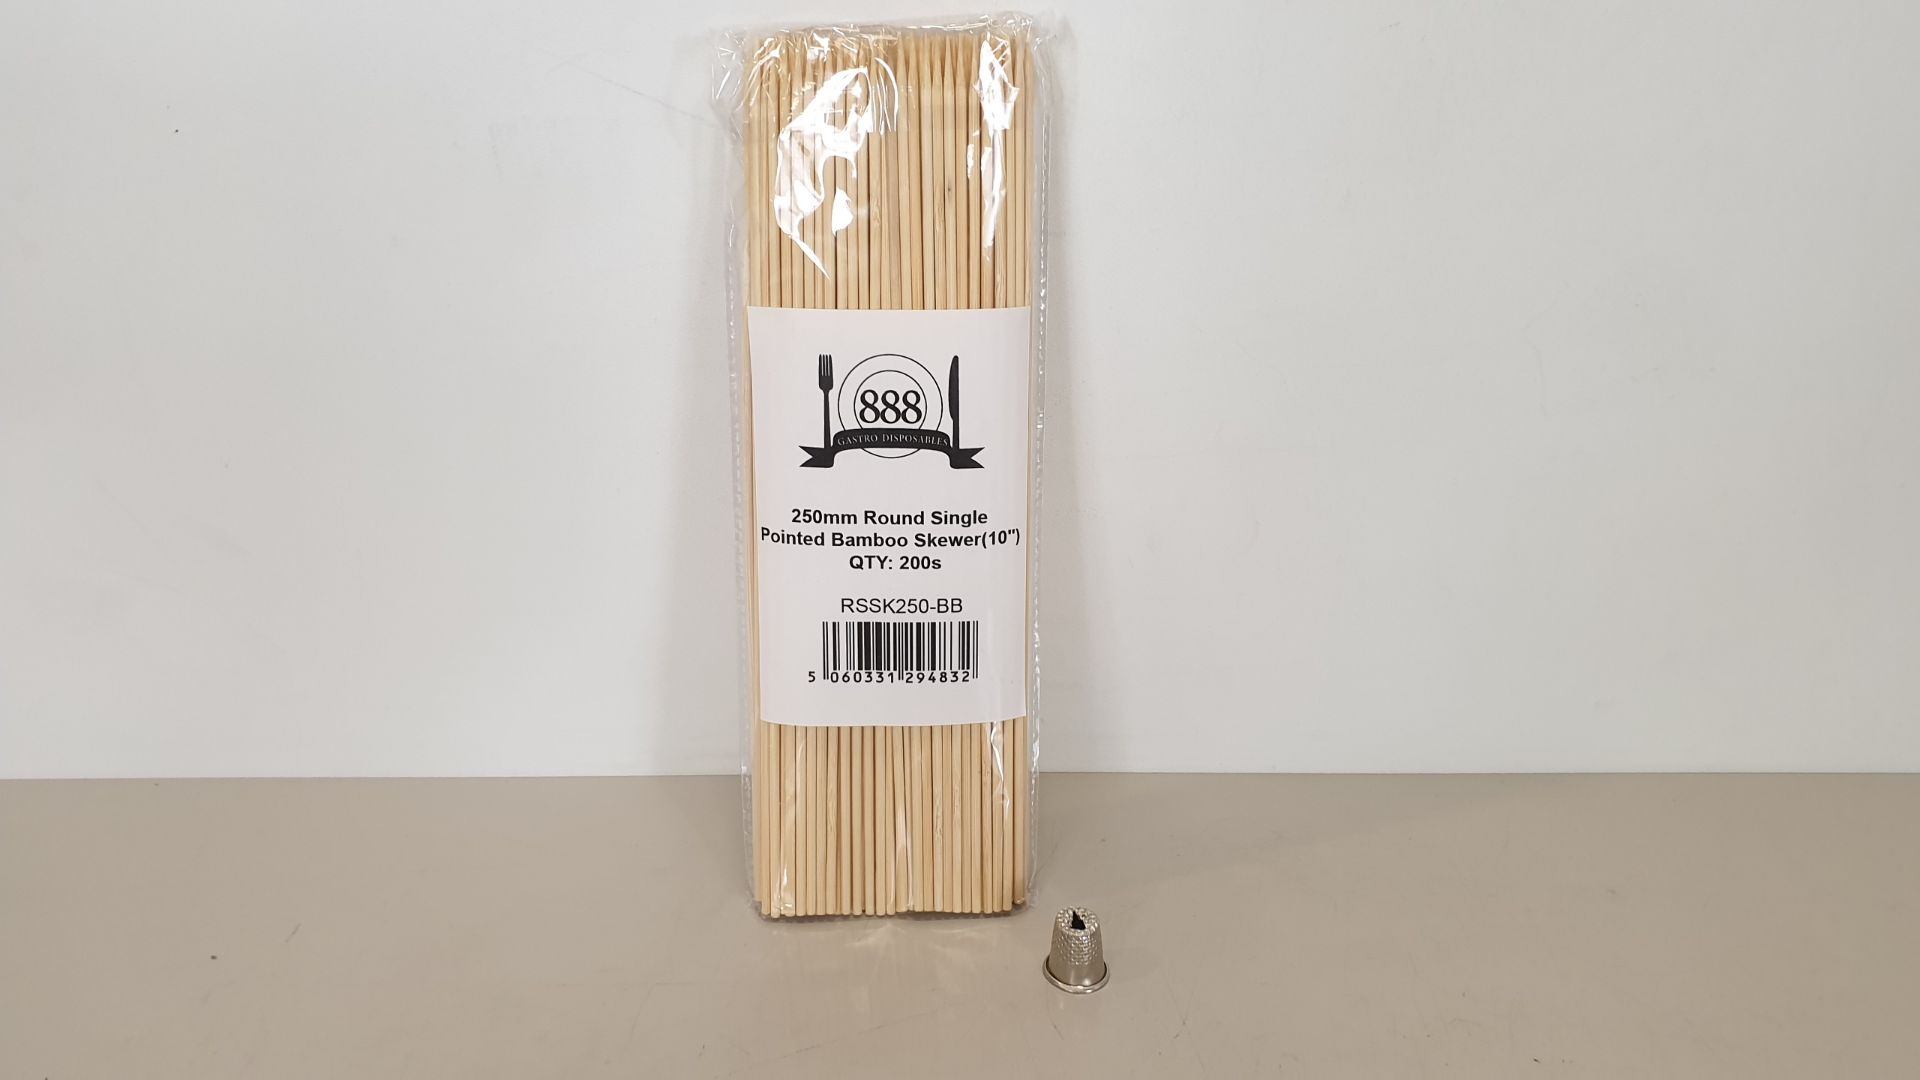 10,000 X 250MM ROUND SINGLE POINTED BAMBOO SKEWERS (10 X (5X200)) - IN 1 CARTON